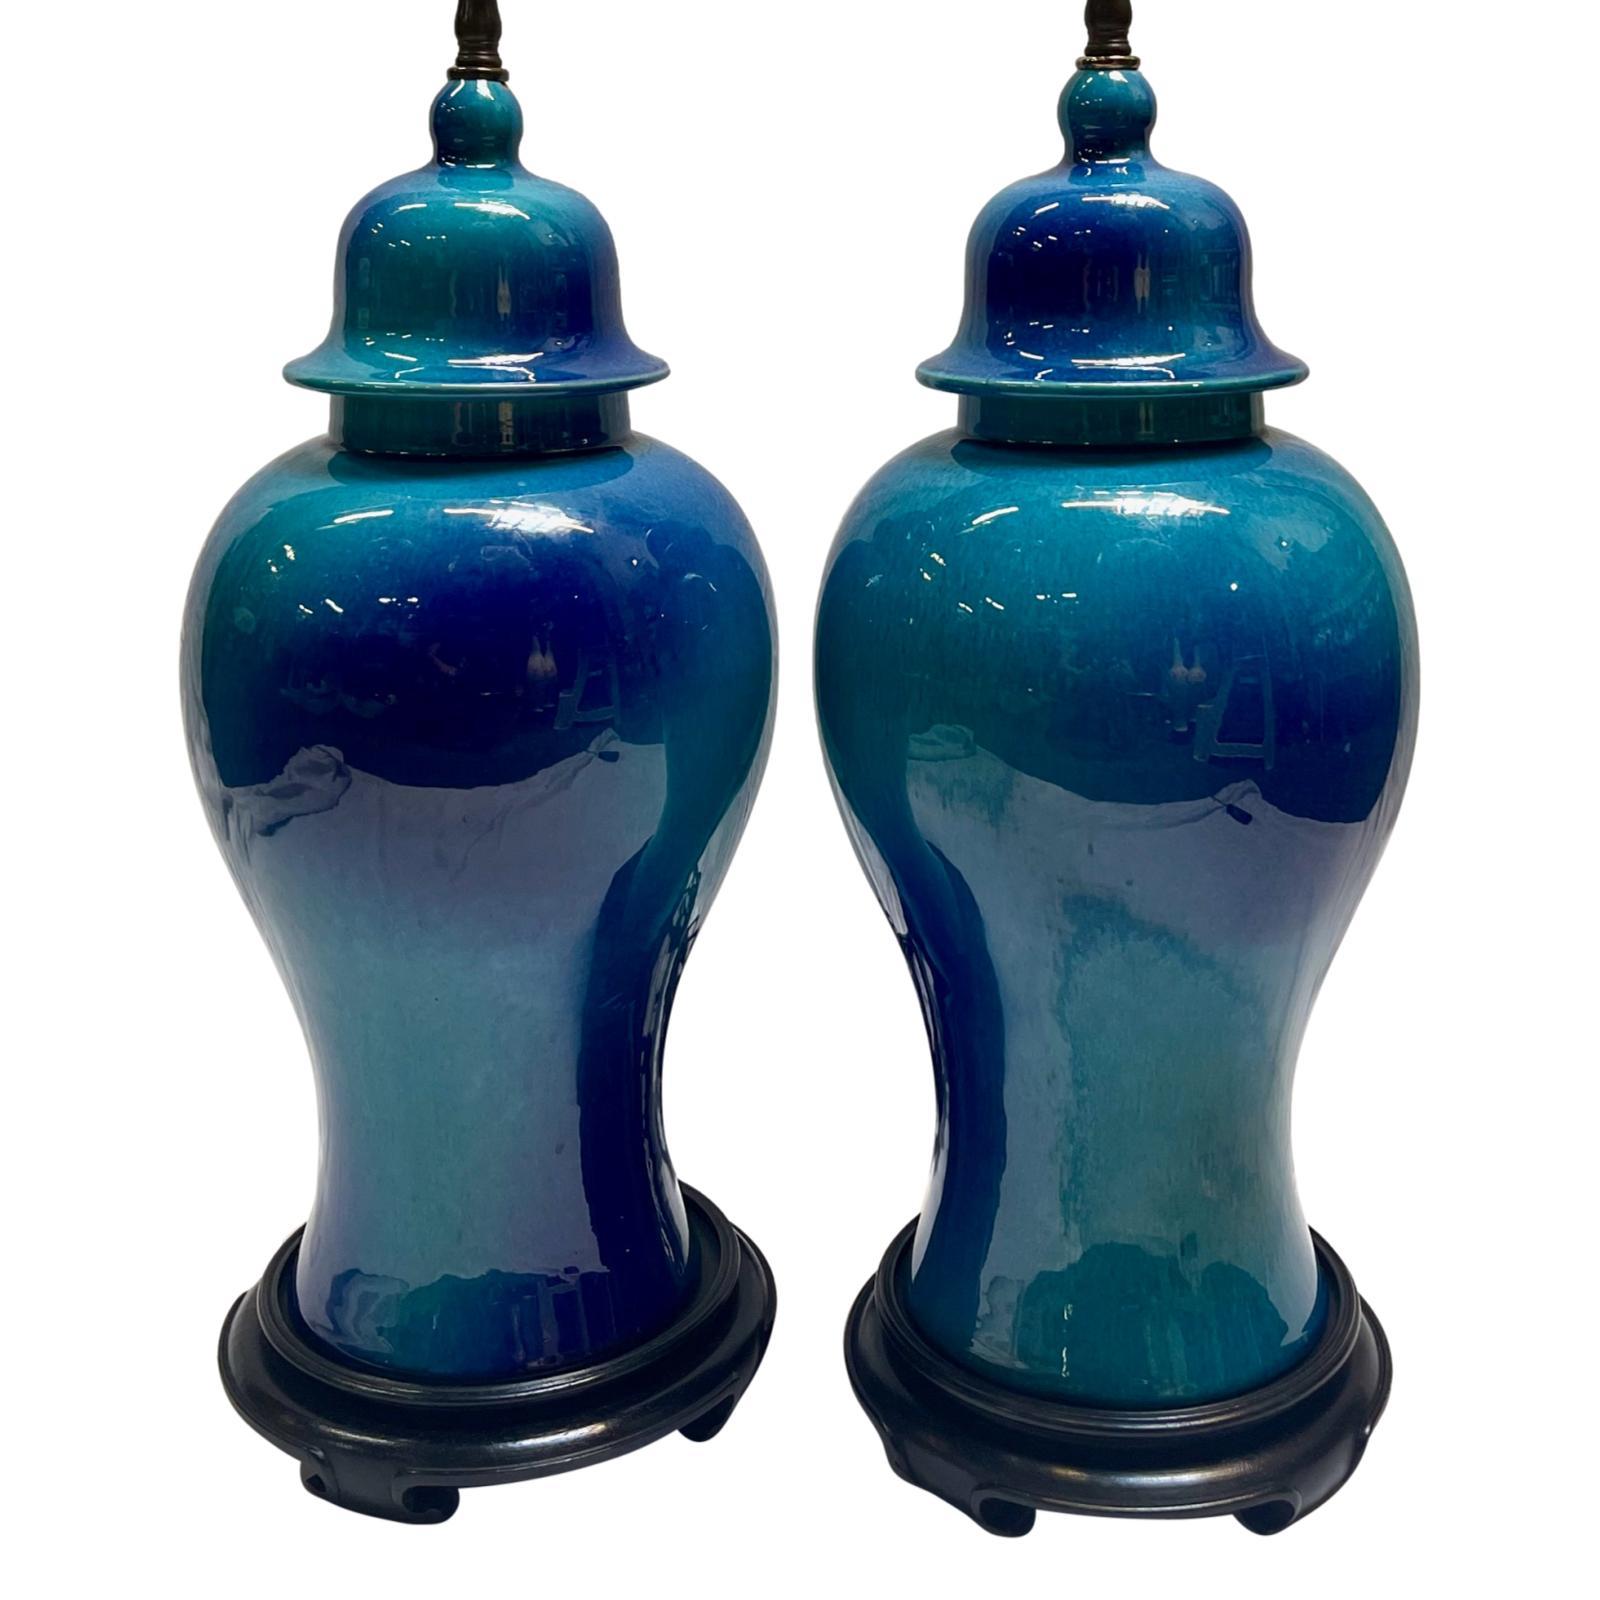 A pair of French circa 1950's glazed porcelain table lamps in blue tones.

Measurements:
Height of body: 19